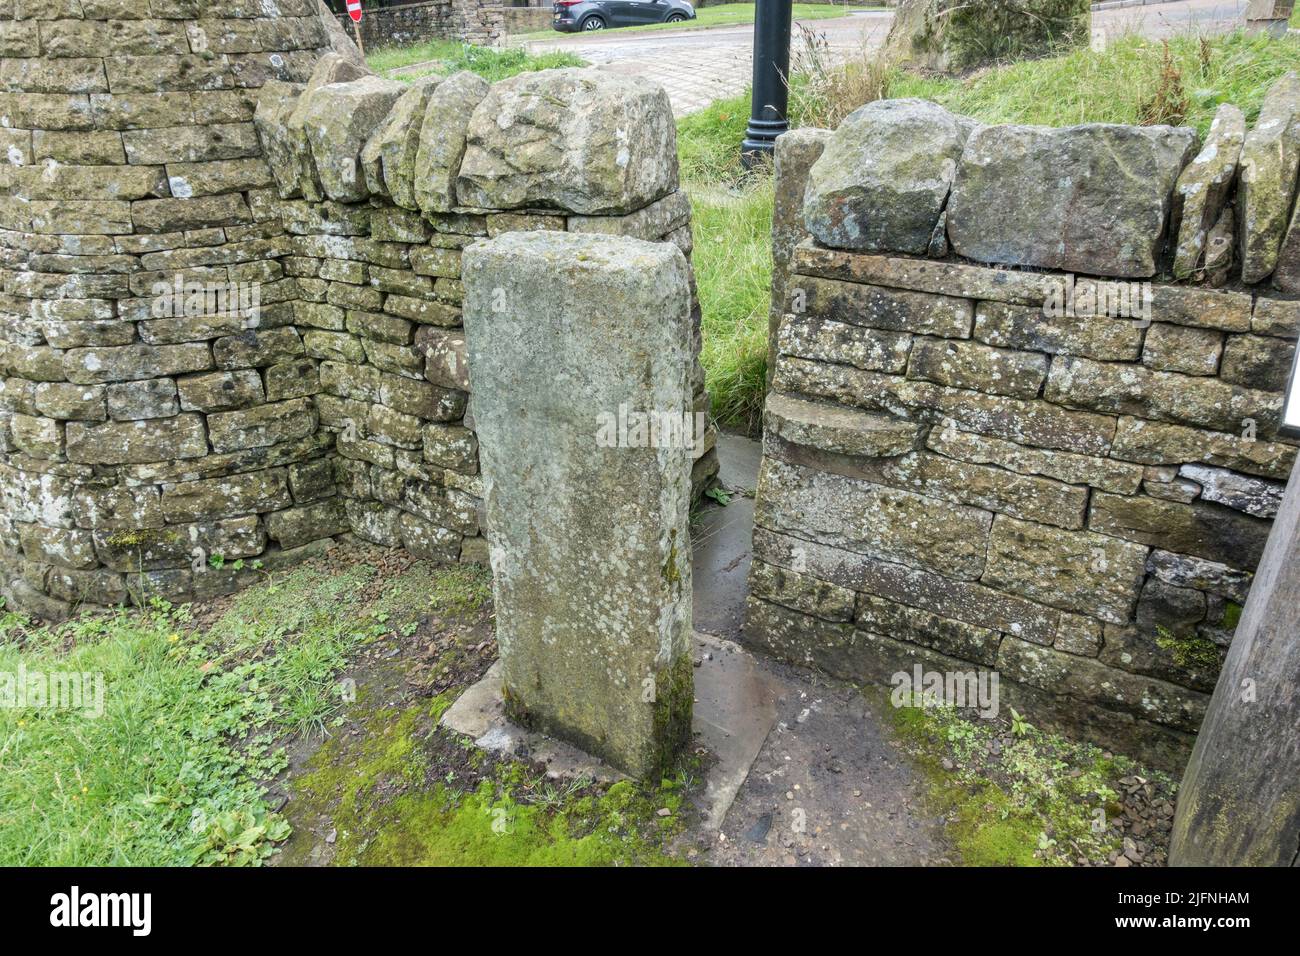 Example of a stump stile, part of a dry stone walling exhibit, Shibden Park, Halifax, Yorkshire, UK. Stock Photo